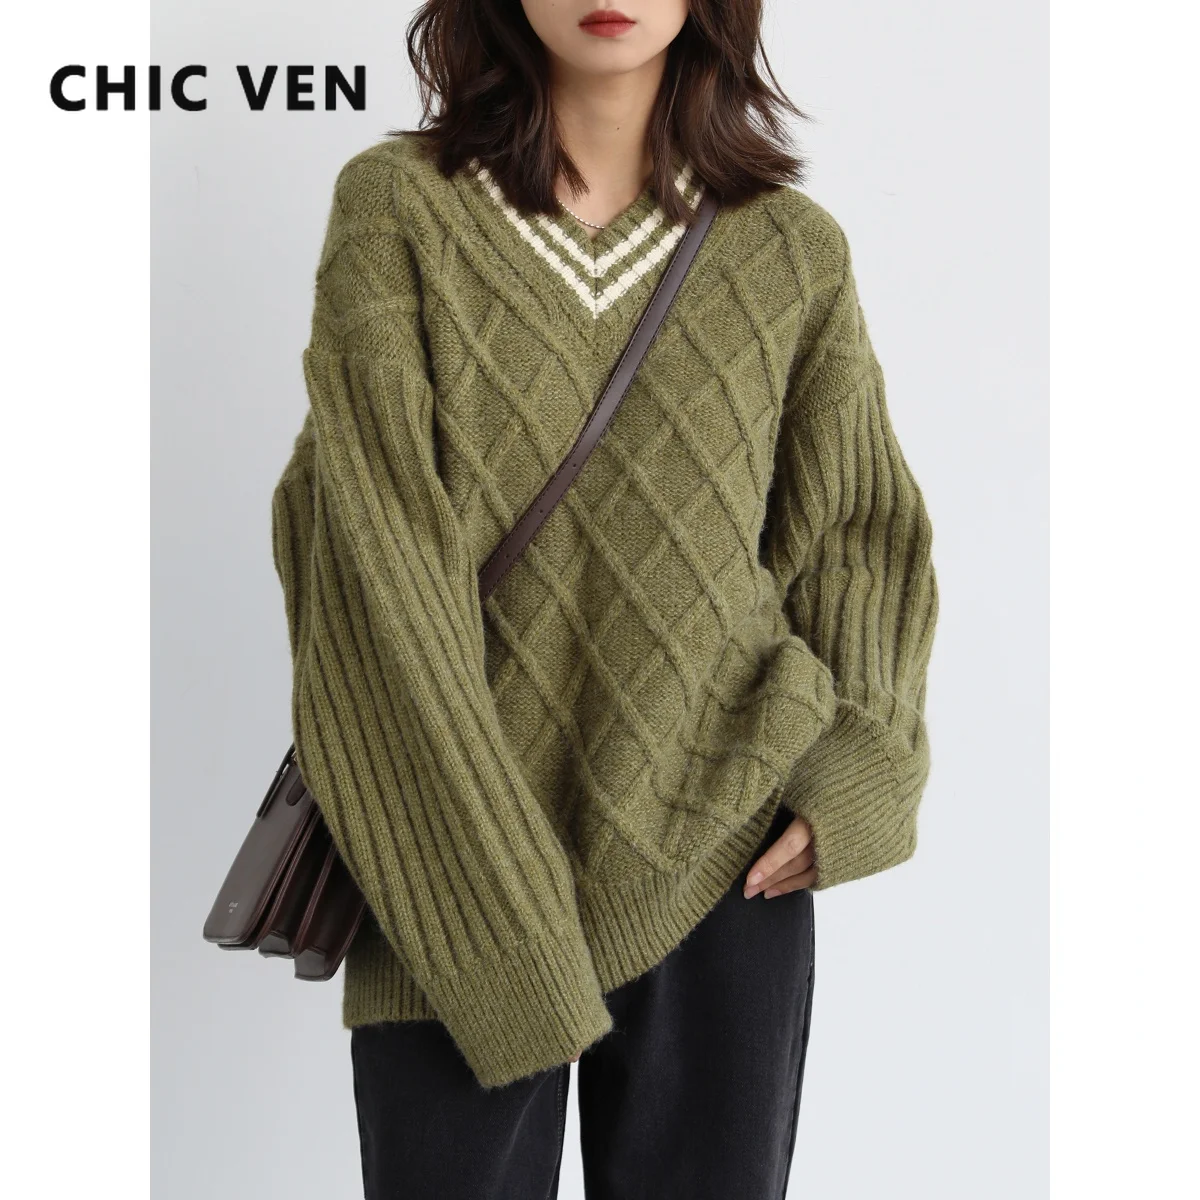 CHIC VEN Women's Sweaters Retro V-neck Turtleneck Knitted Pullover Women Jumper Long Sleeve Loose Tops Female Autumn Winter